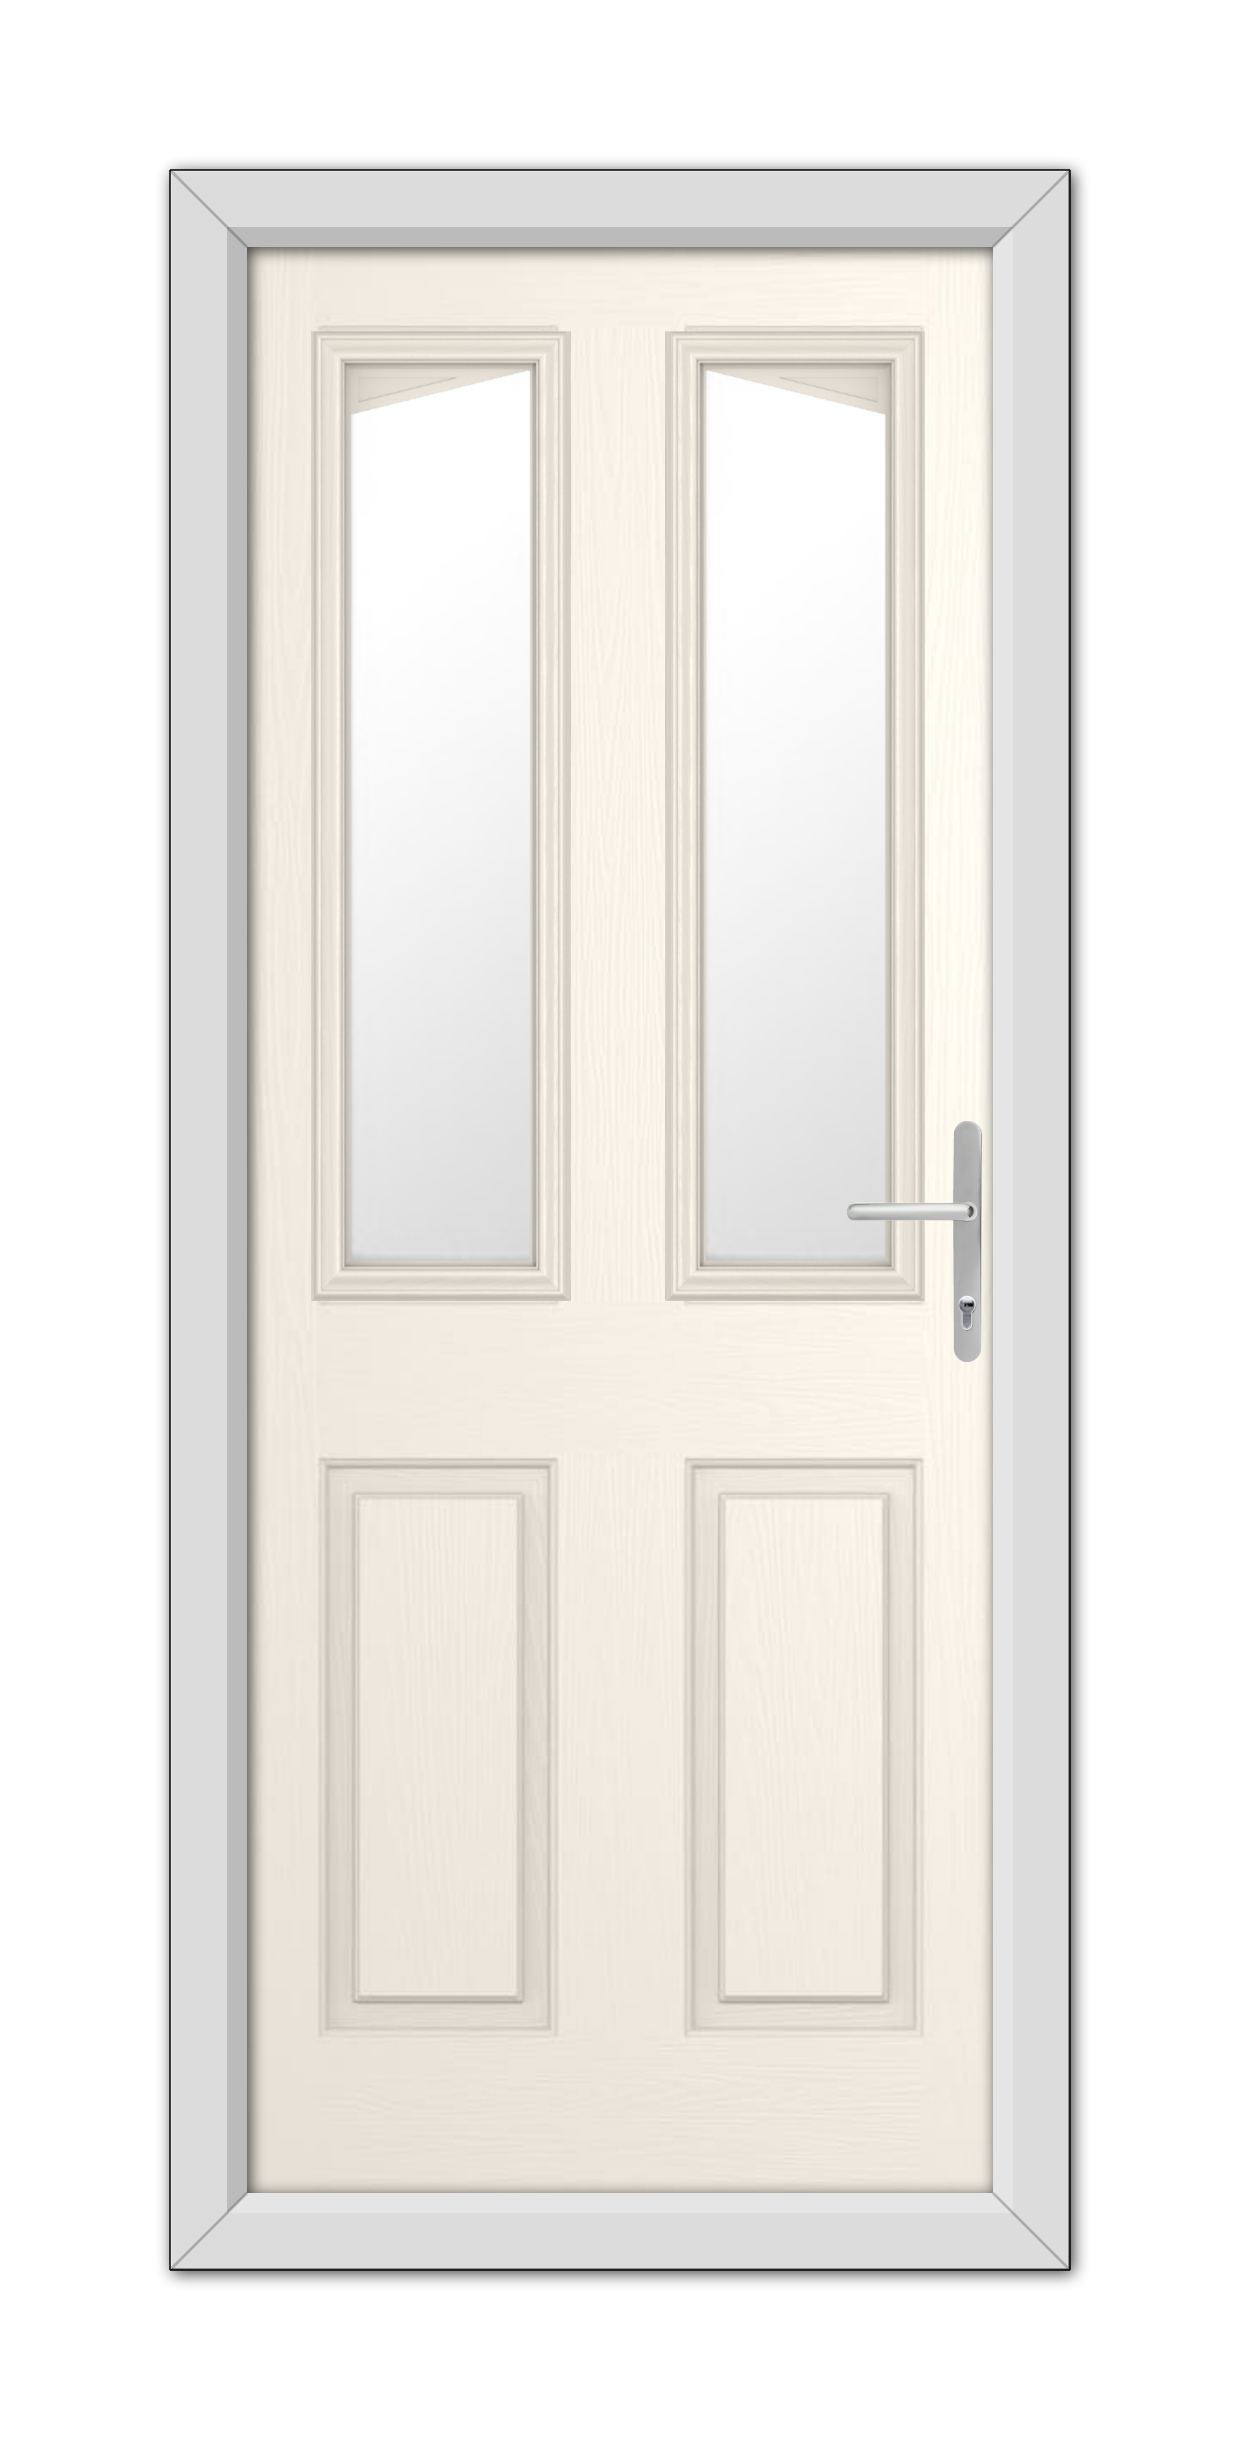 Modern White Foil Highbury Composite Door 48mm Timber Core with upper windows and a metal handle, set in a gray frame, isolated on a white background.